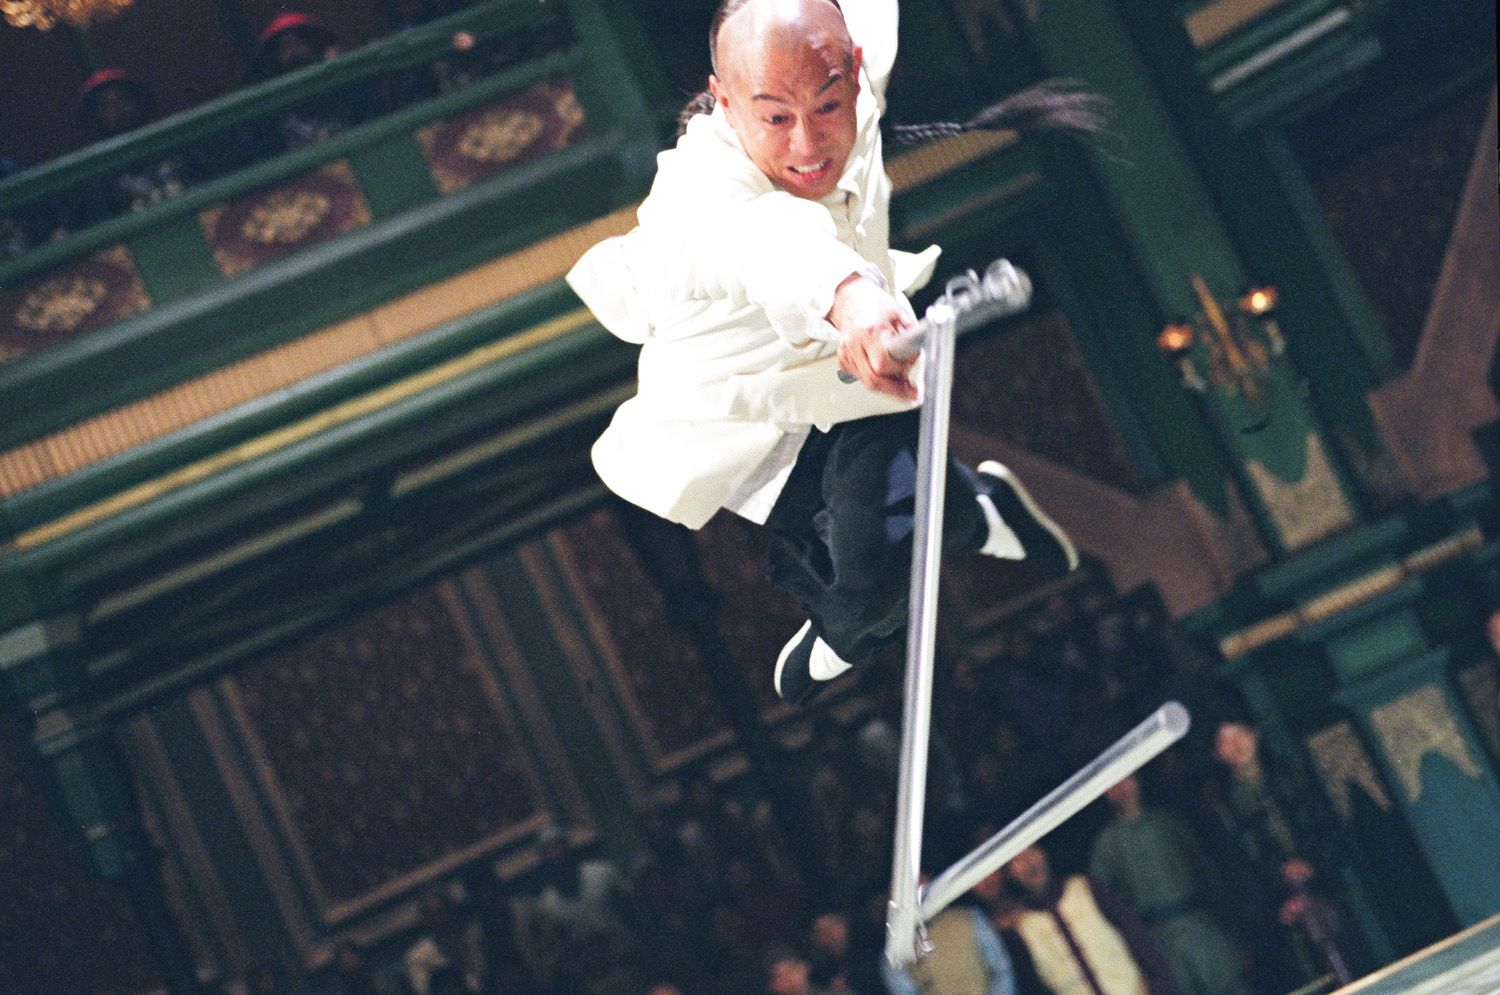 Jet Li's Fearless - pictures and wallpapers from the movie